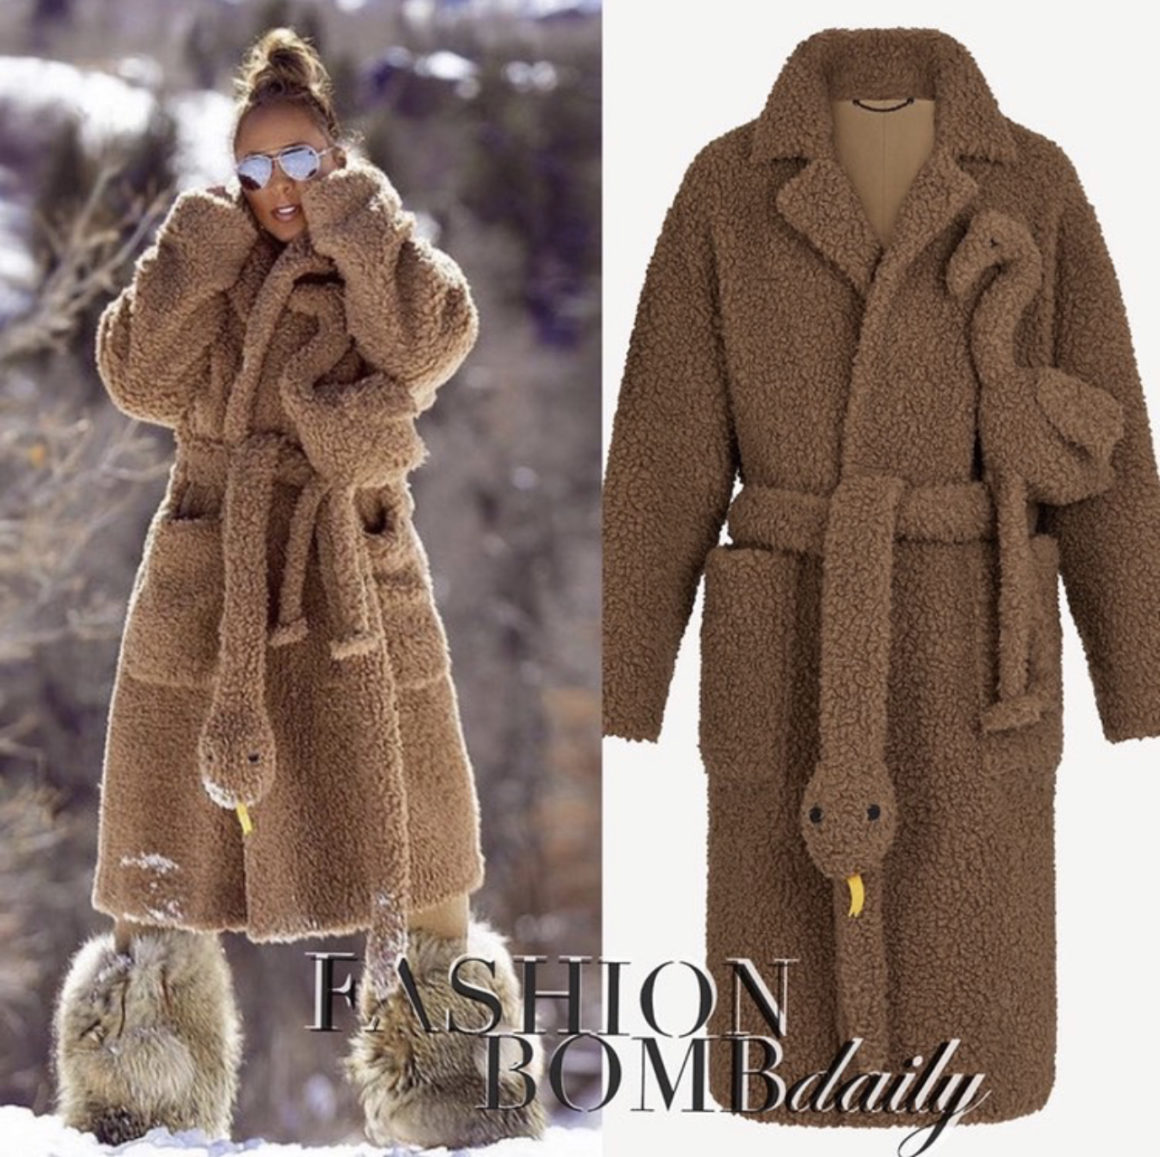 This Louis Vuitton inspired fur trimmed fleece coat is sure to be